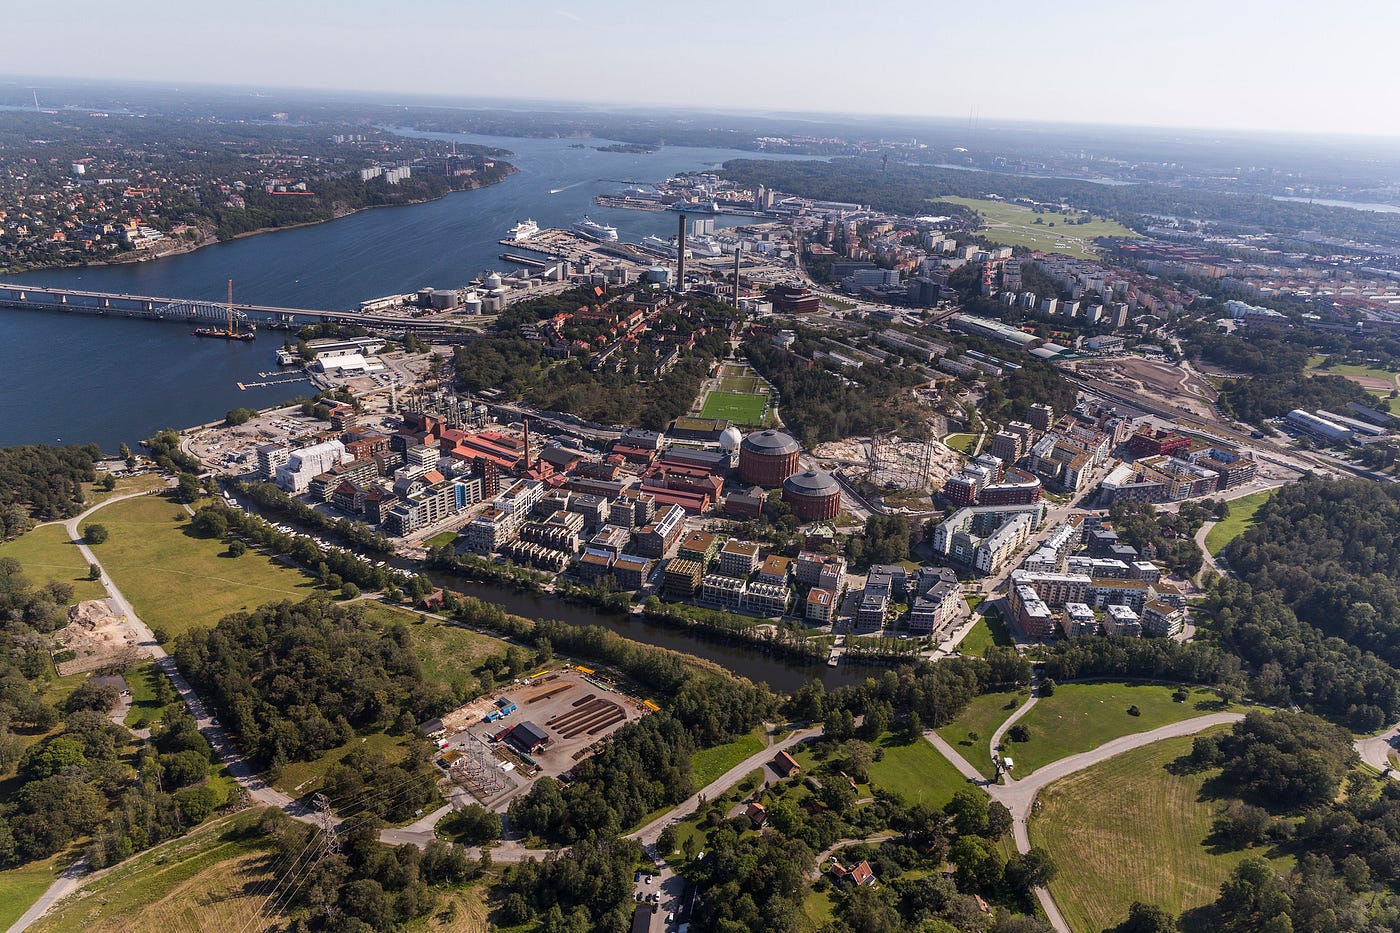 An aerial view of the Royal Seaport development in Stockholm, looking south.